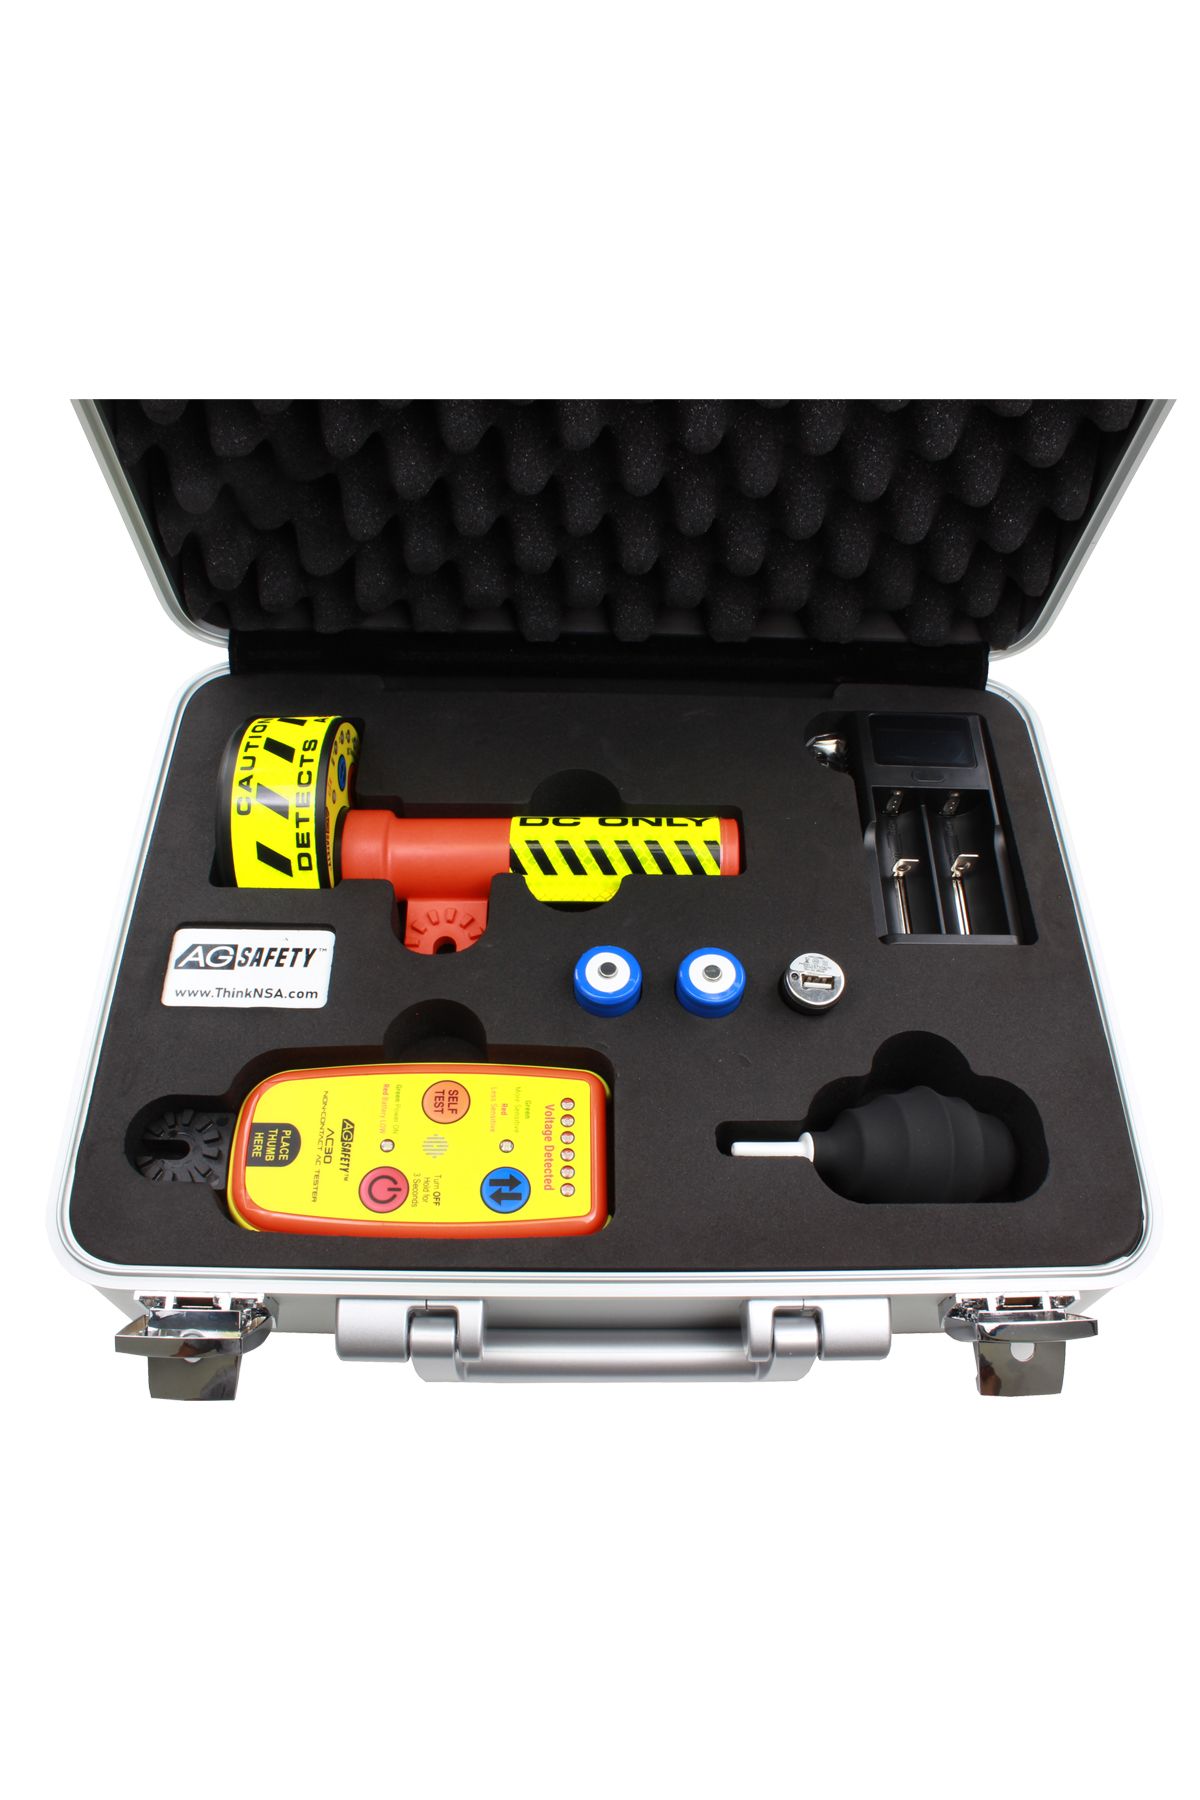 AG Safety ACDC Voltage Detector Kit (each)